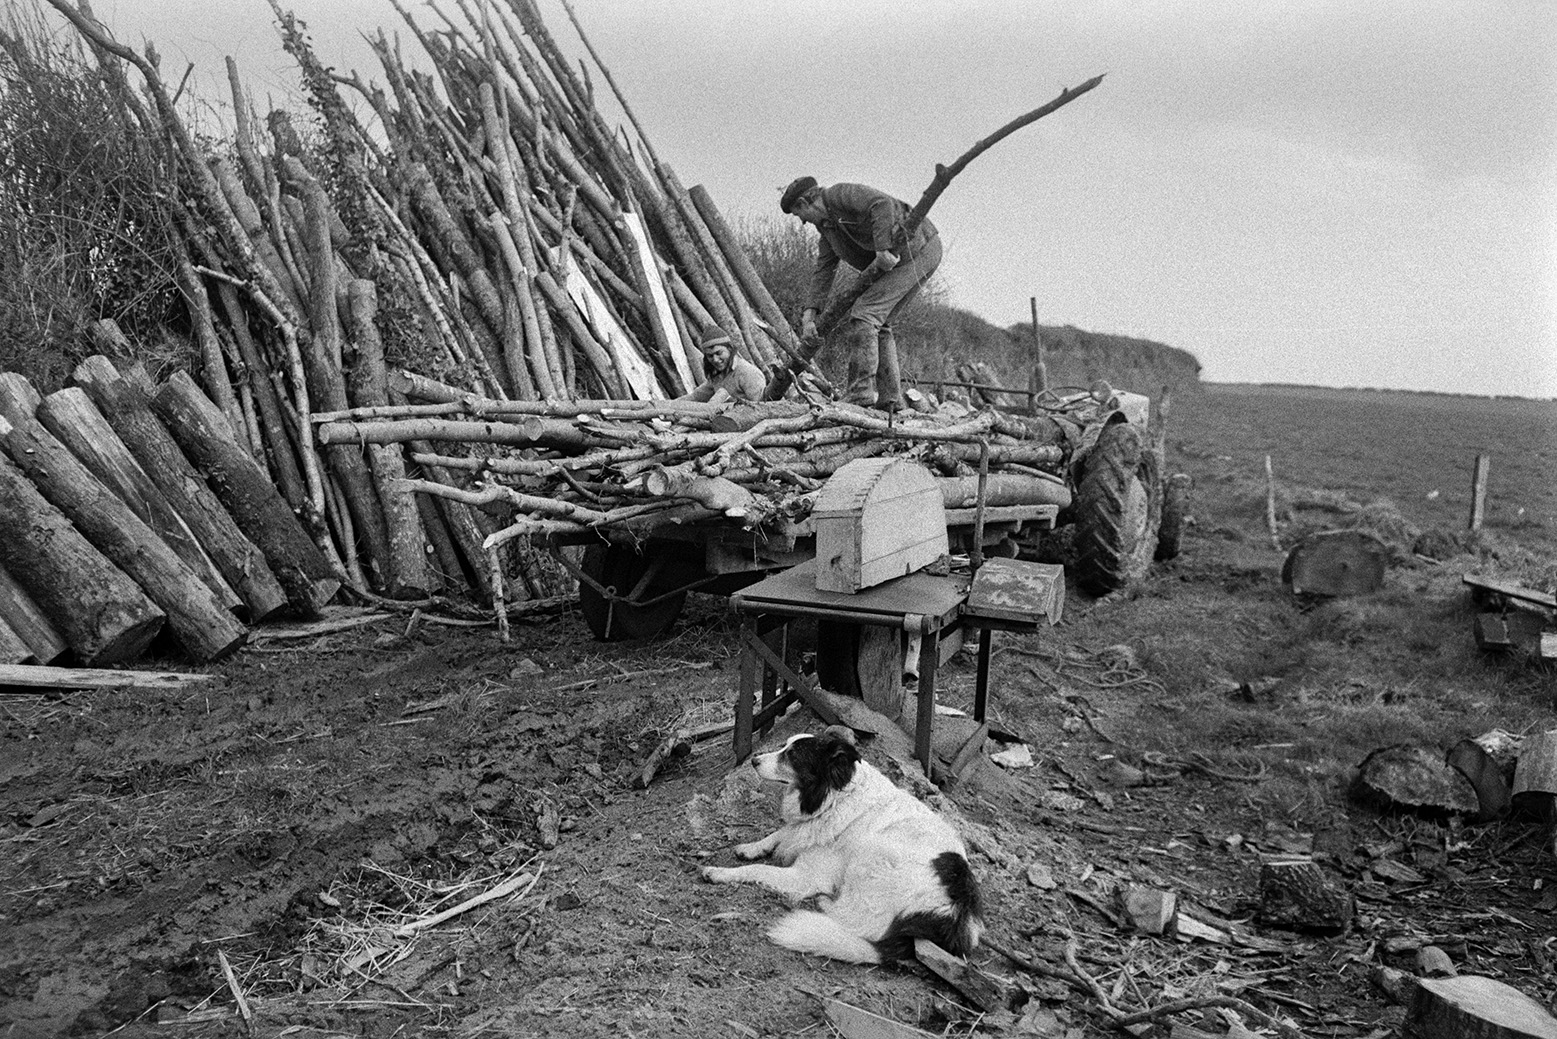 Derek Bright and Ivor Bourne unloading logs from a trailer and piling them against a hedge in a field at Mill Road Farm, Beaford. A circular saw is visible in the foreground and a dog is sat watching them. The farm was also known as Jeffrys.